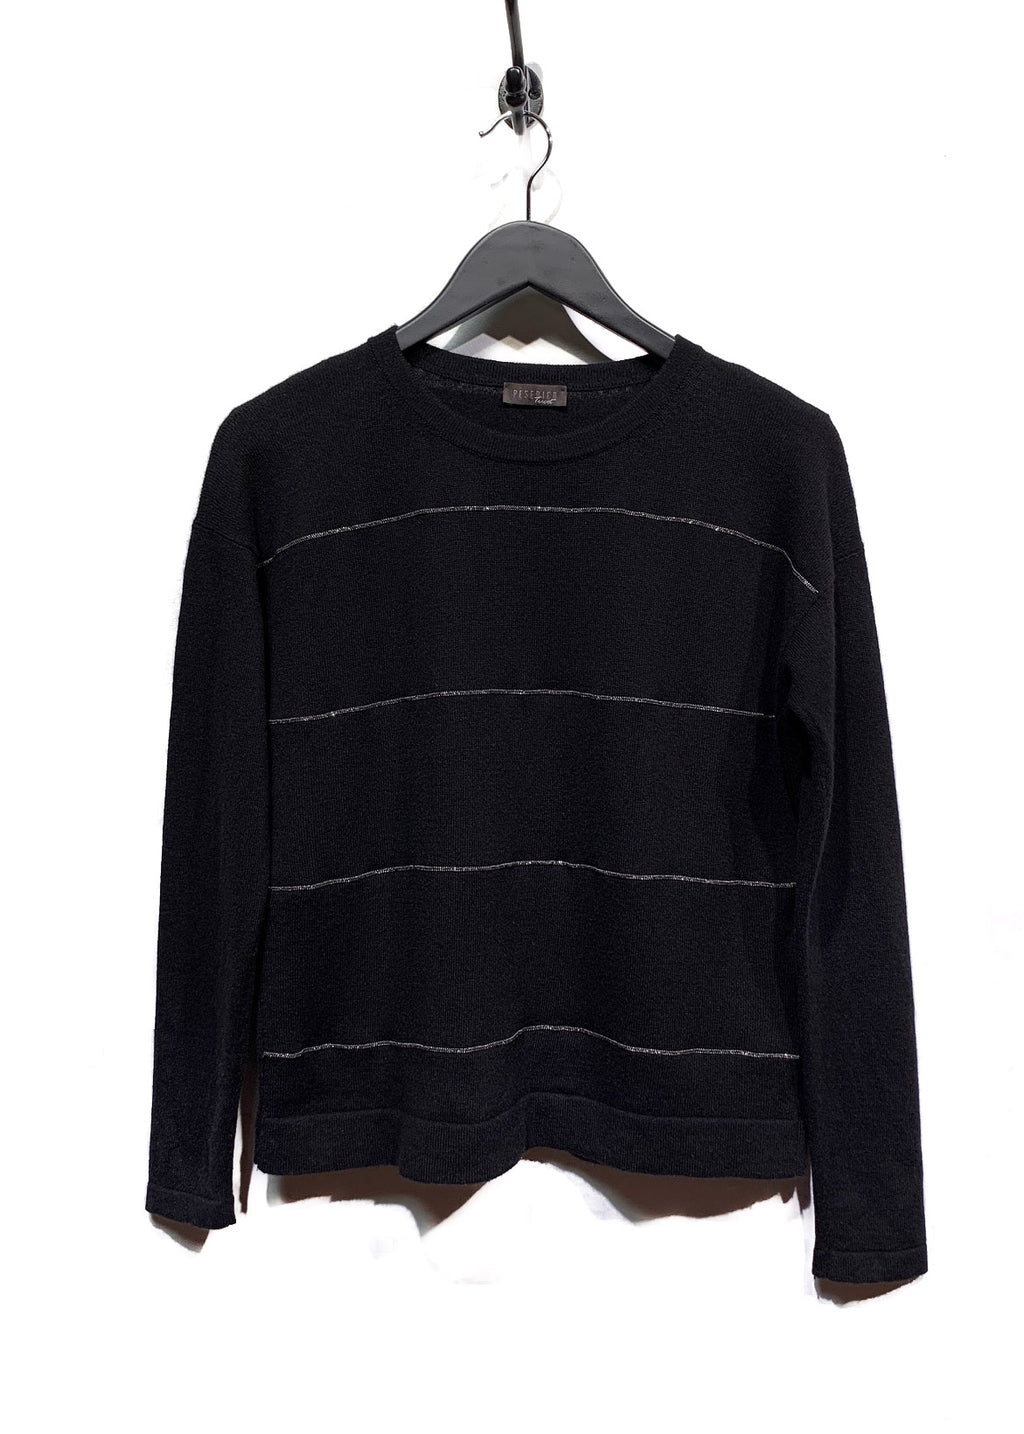 Peserico Tricot Black Wool Blend Beaded Trims Sweater